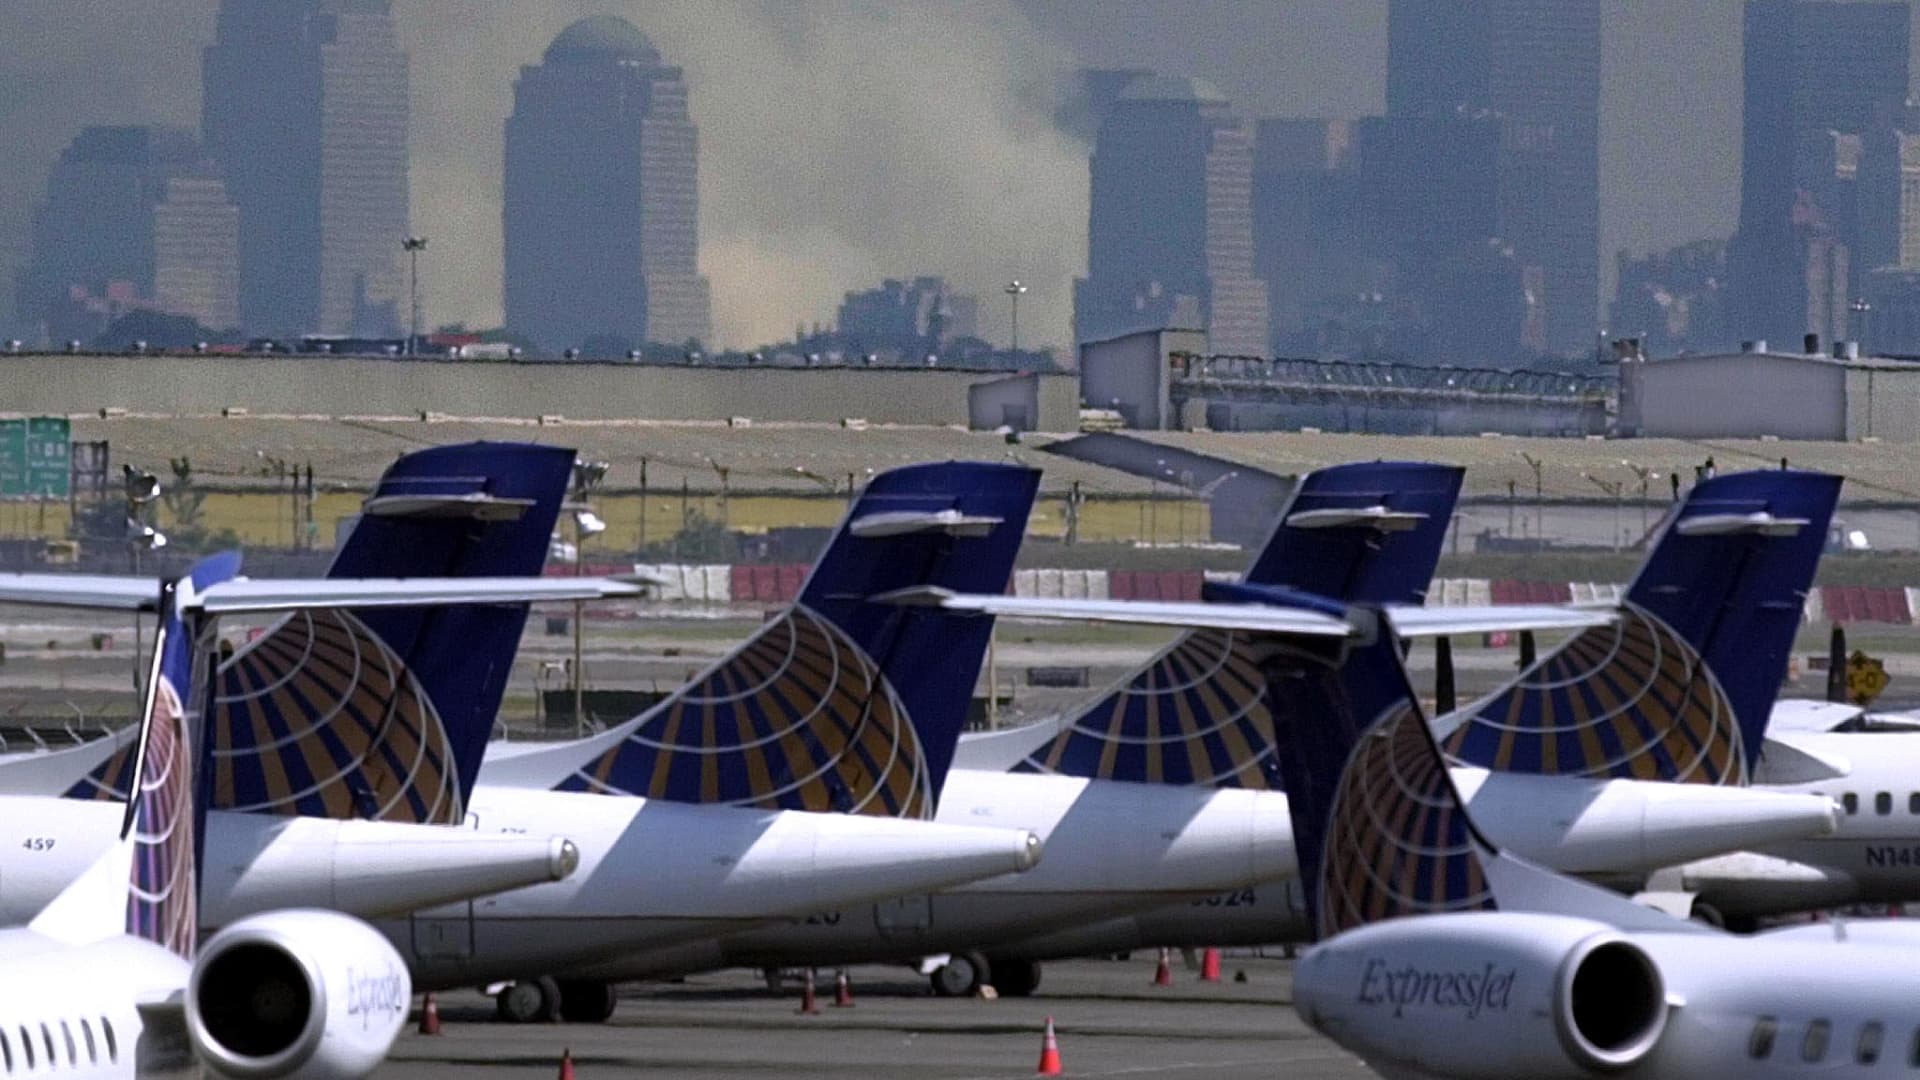 Smoke continues to billow from the remains of the World Trade Center as Continental Express planes sit at the closed Newark, New Jersey Airport 12 September 2001 in the wake of the terrorist attack on the World Trade Center. One of the hijacked planes departed the Newark Airport and later crashed near Pittsburgh, Pennsylvania.